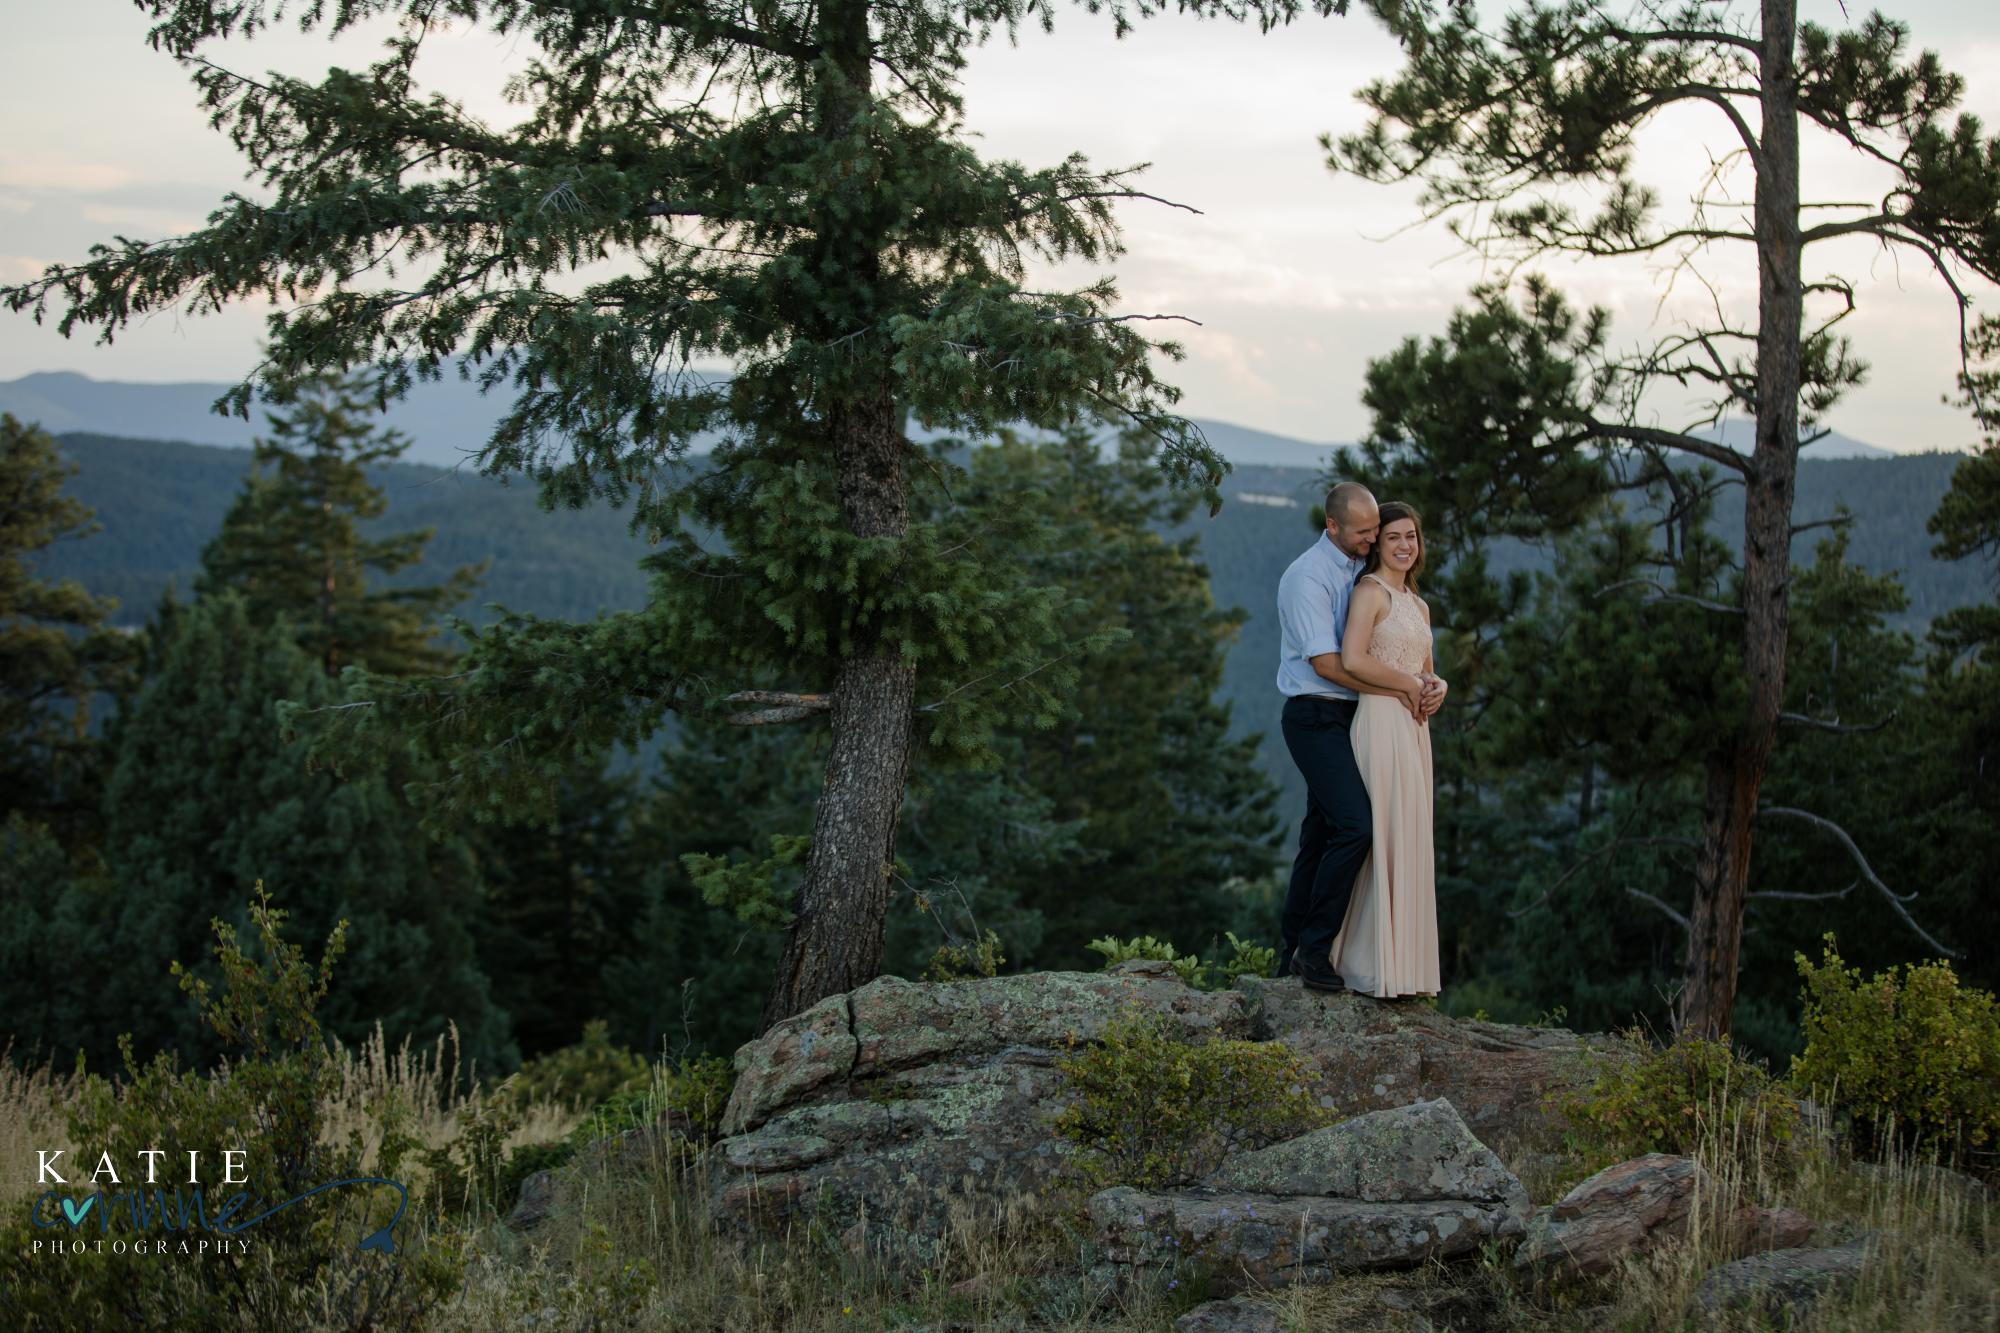 Newly engaged couple at Mt Falcon in Colorado